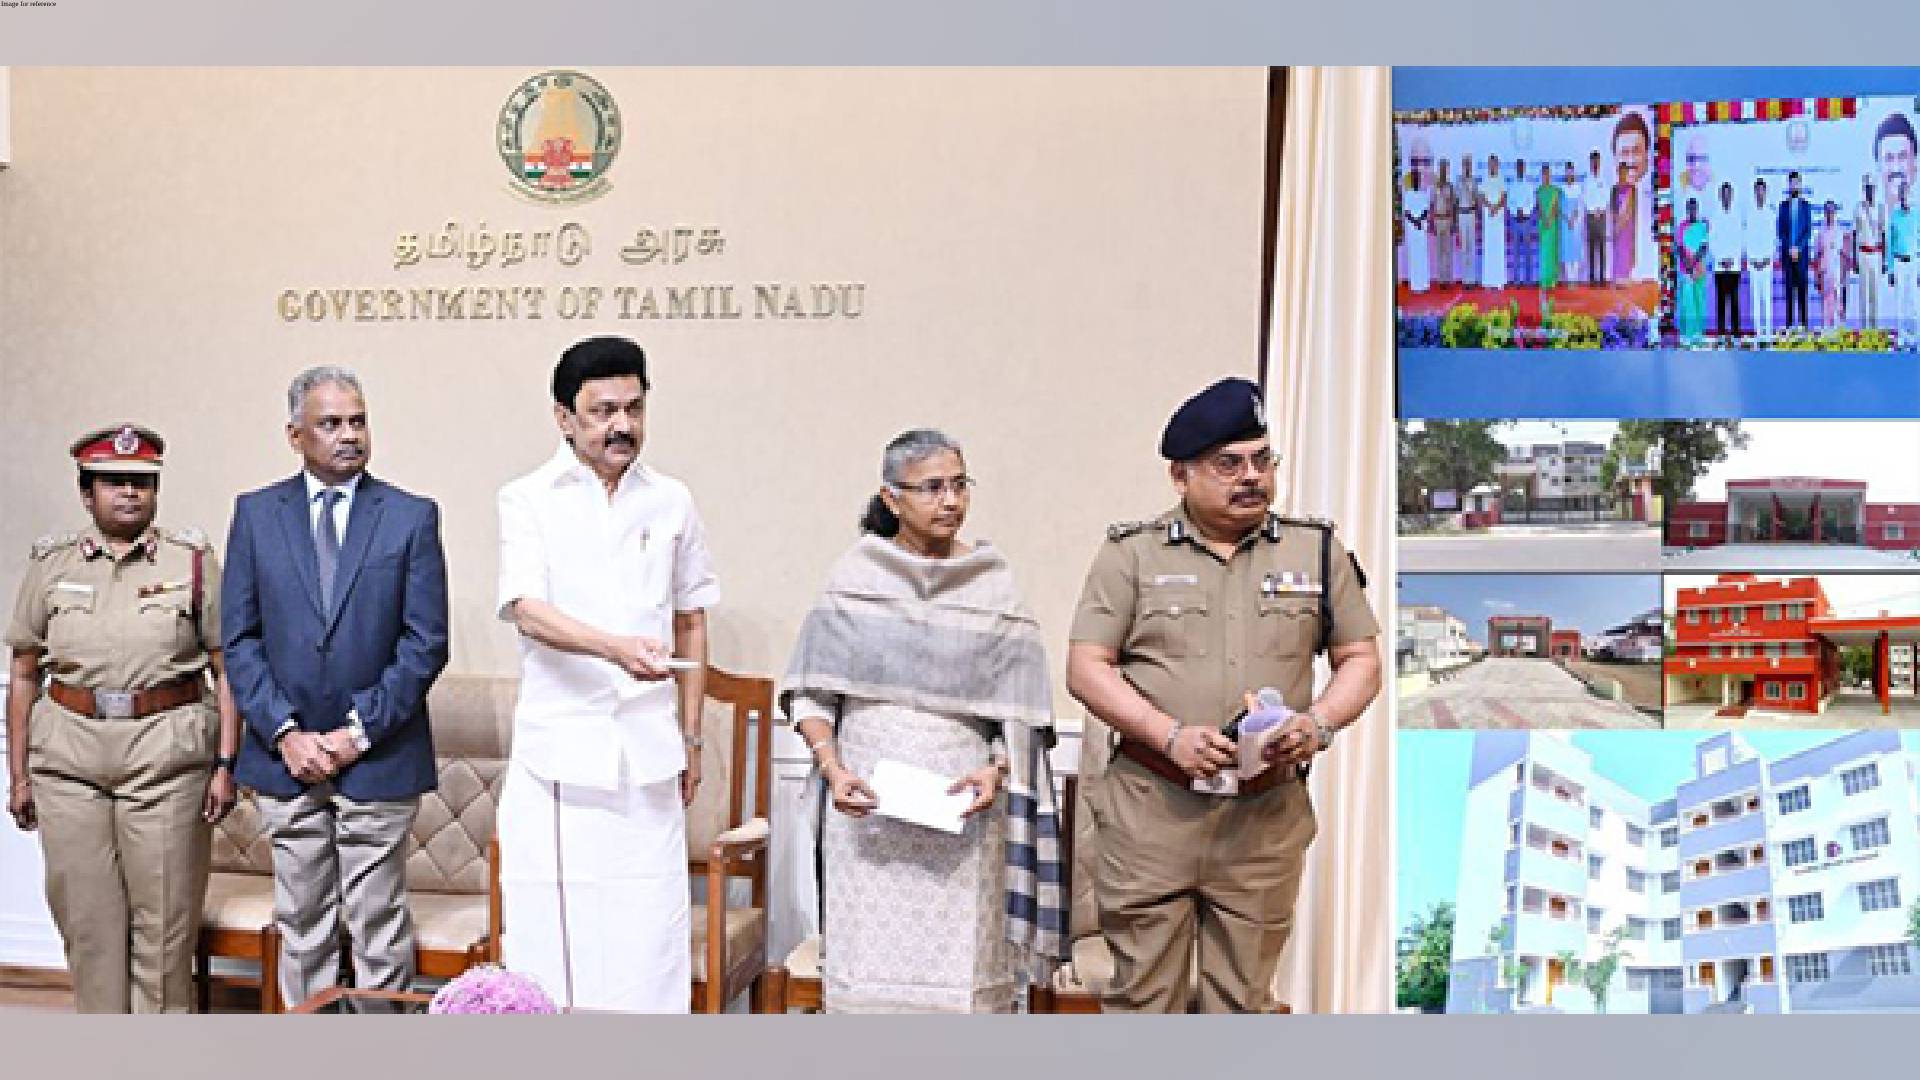 Tamil Nadu CM Stalin virtually inaugurates, lays foundation stone for various welfare projects in Chennai